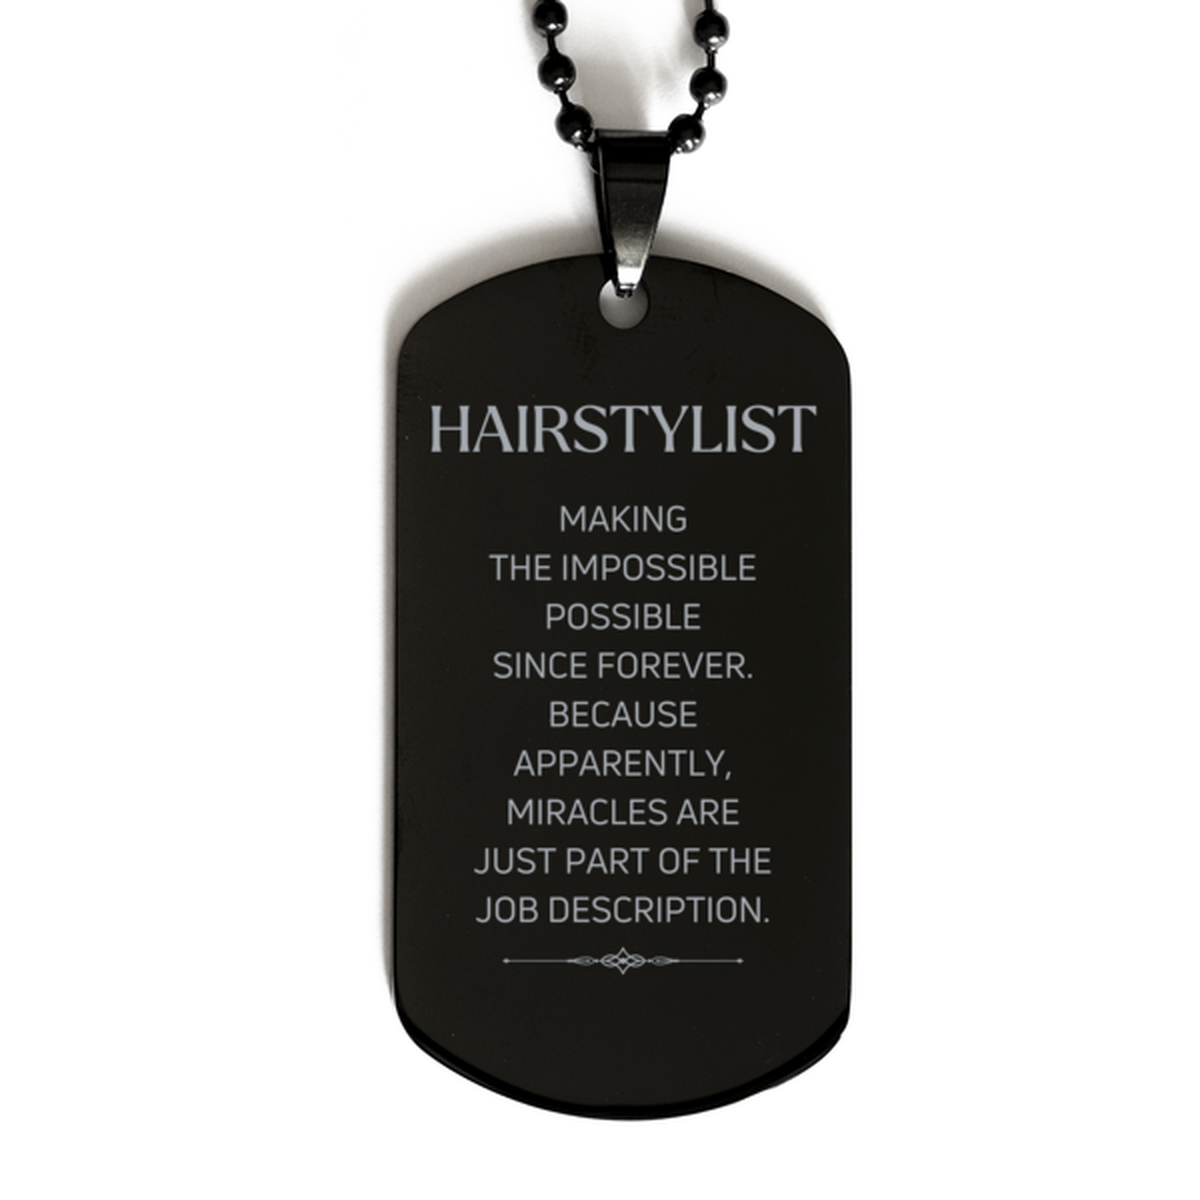 Funny Hairstylist Gifts, Miracles are just part of the job description, Inspirational Birthday Black Dog Tag For Hairstylist, Men, Women, Coworkers, Friends, Boss